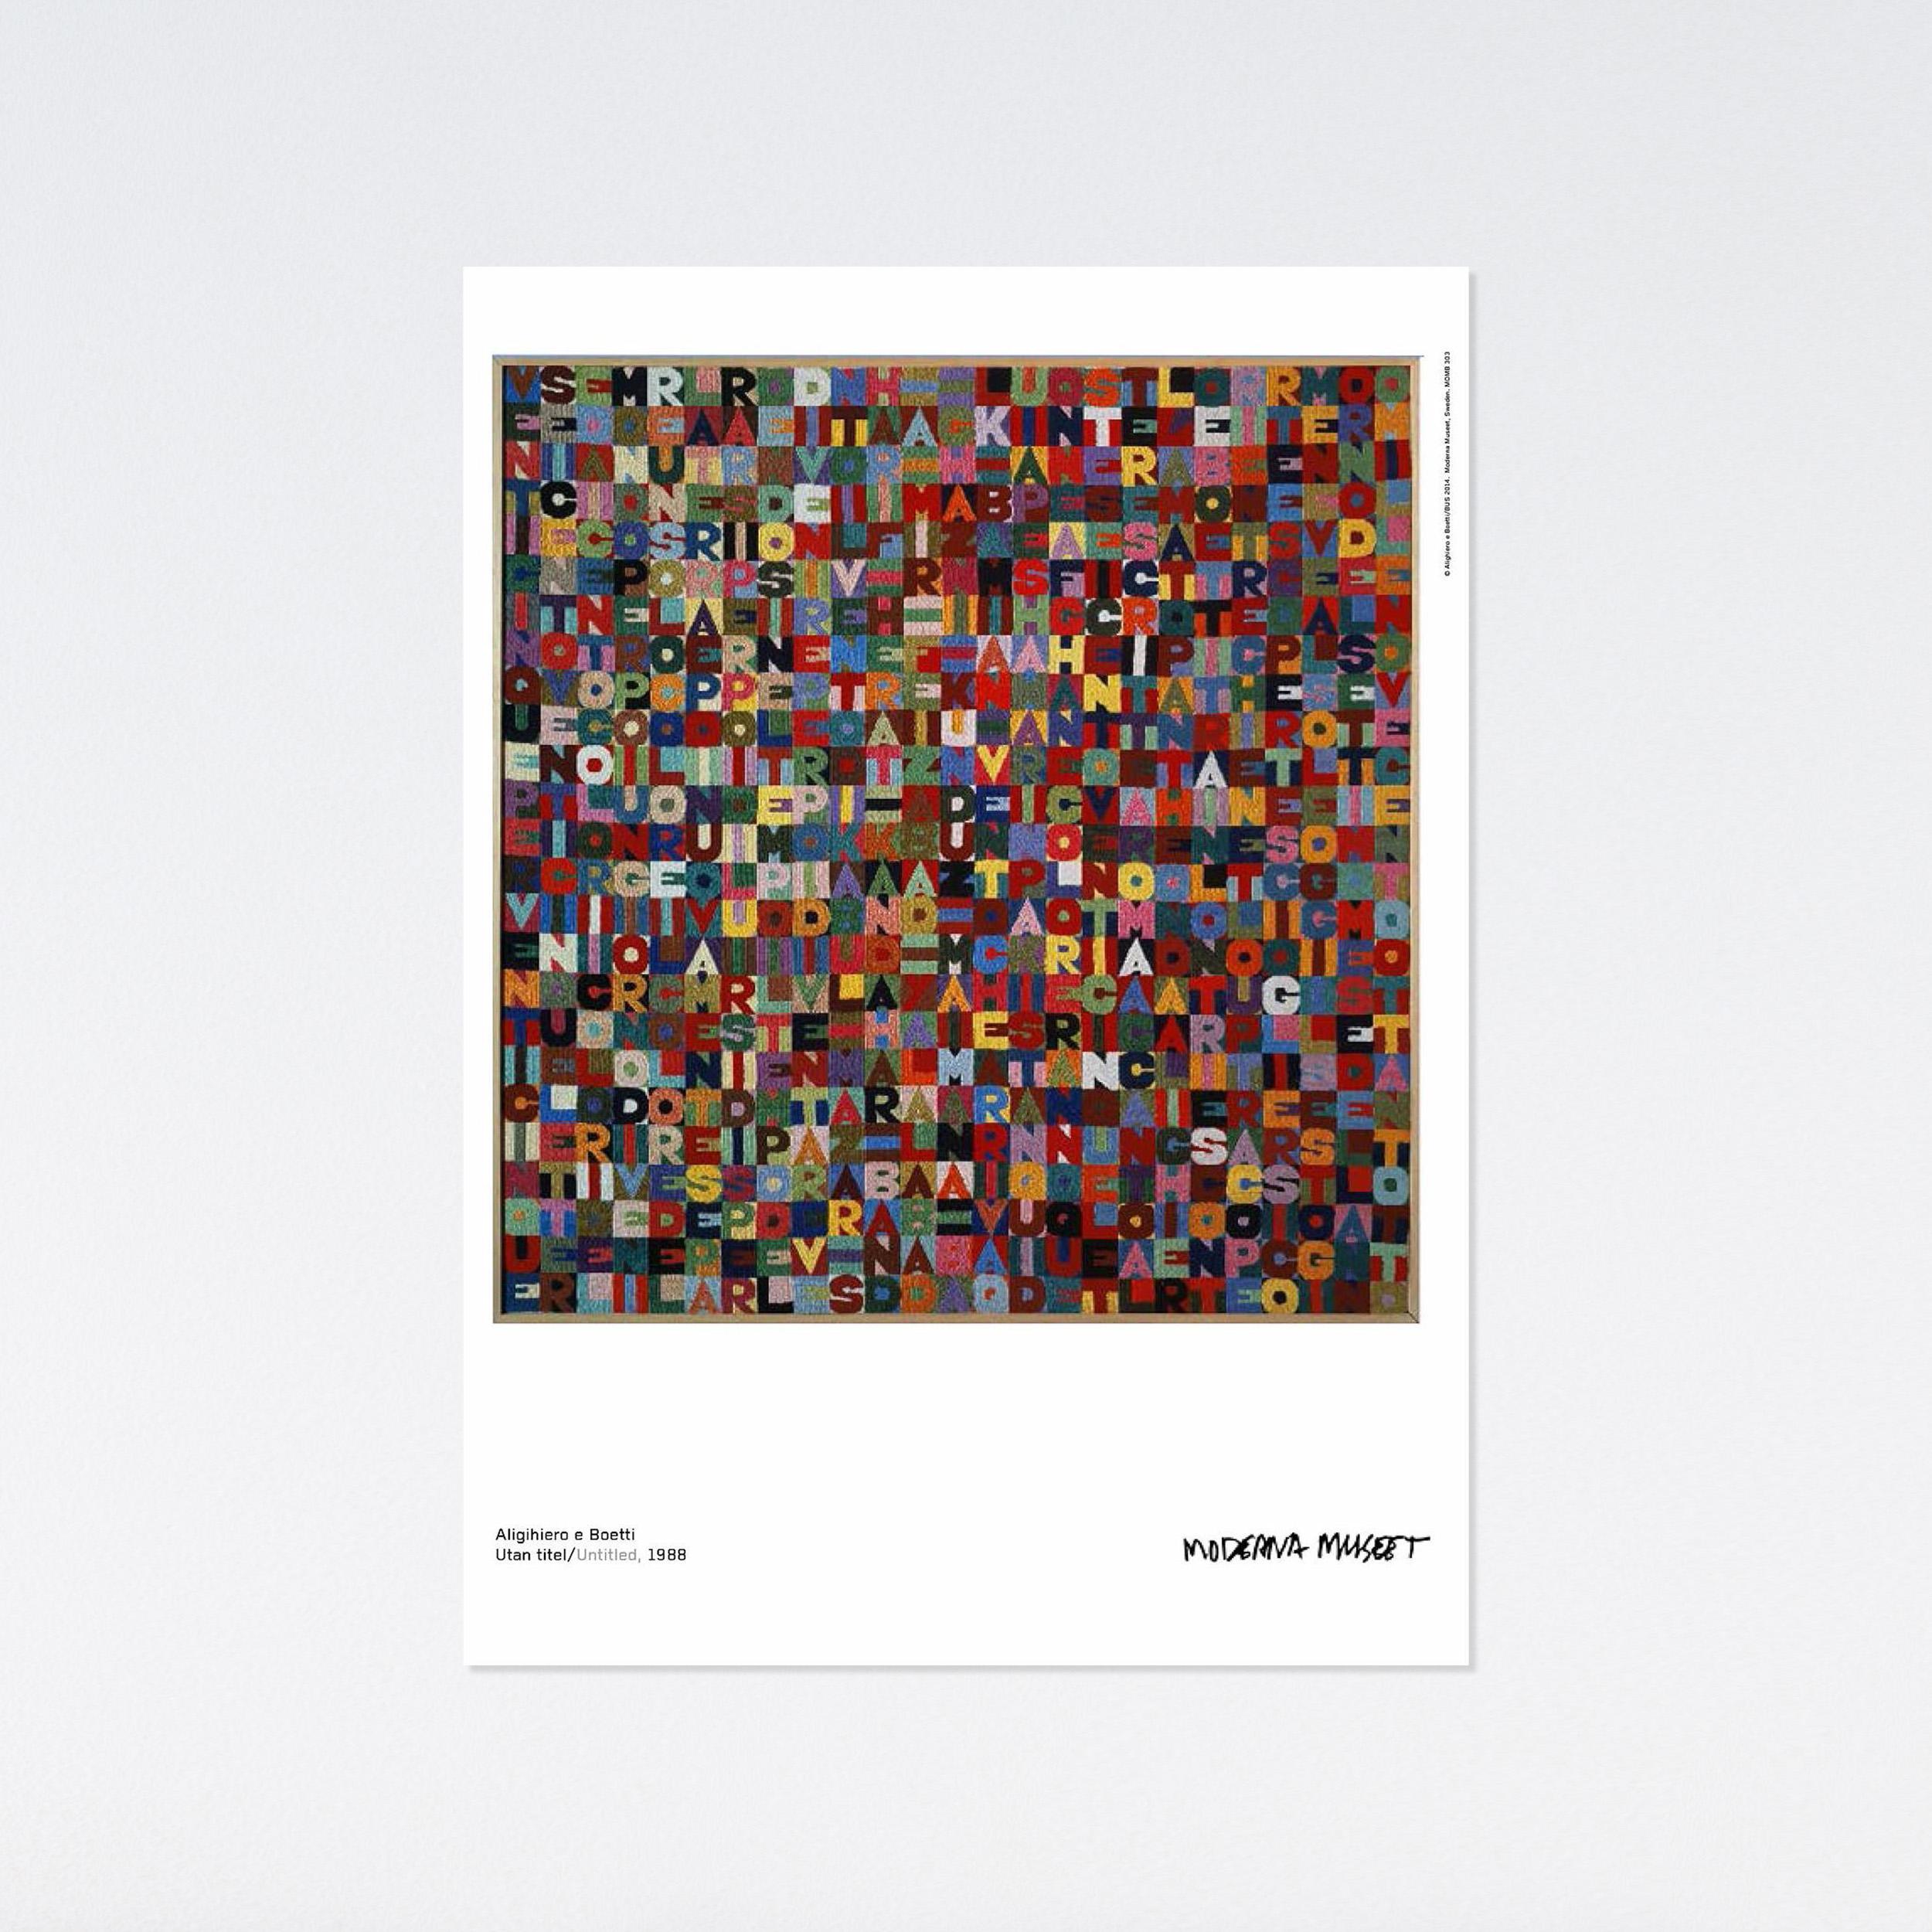 2014 poster from the Moderna Museet featuring the work of Alighiero Boetti. 

19.68 x 27.55 in
50 x 70 cm

A prominent member of the Italian conceptual art movement Arte Povera, Alighiero Boetti became famous for his colorful, woven grids of letters